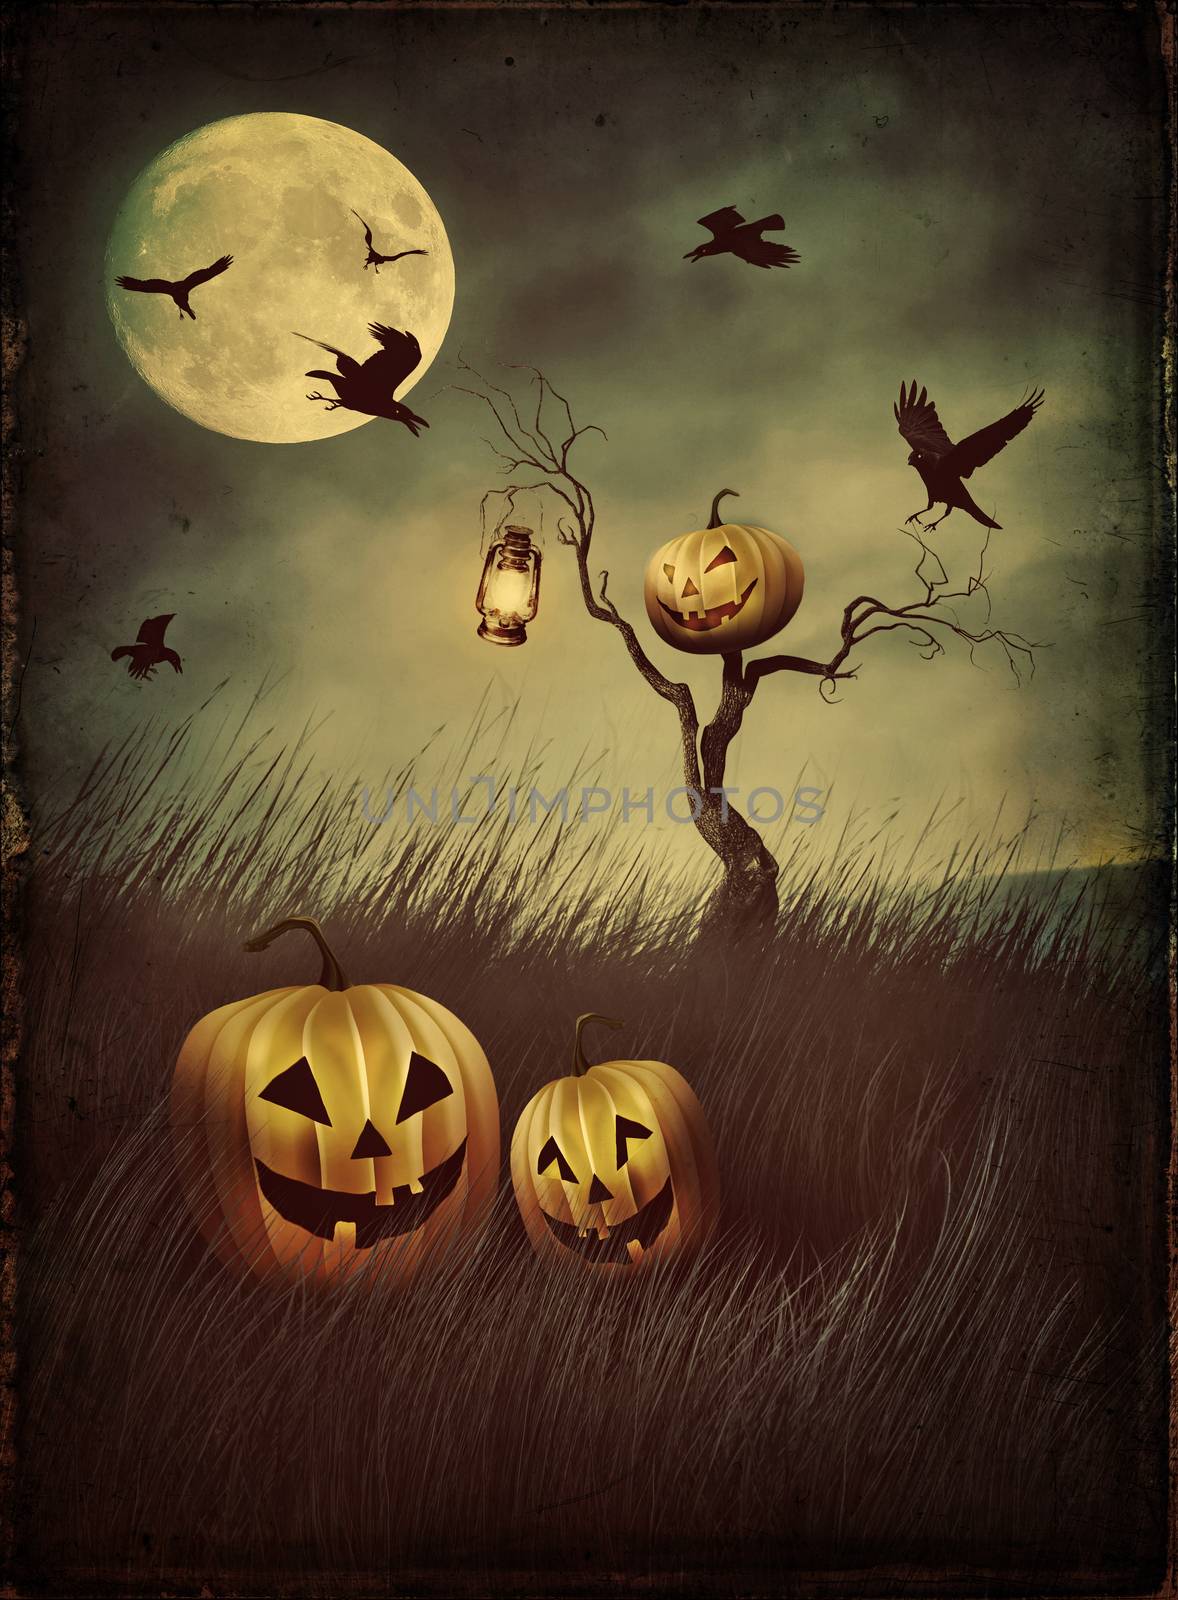 Pumpkin scarecrow in fields at night with vintage look by Sandralise